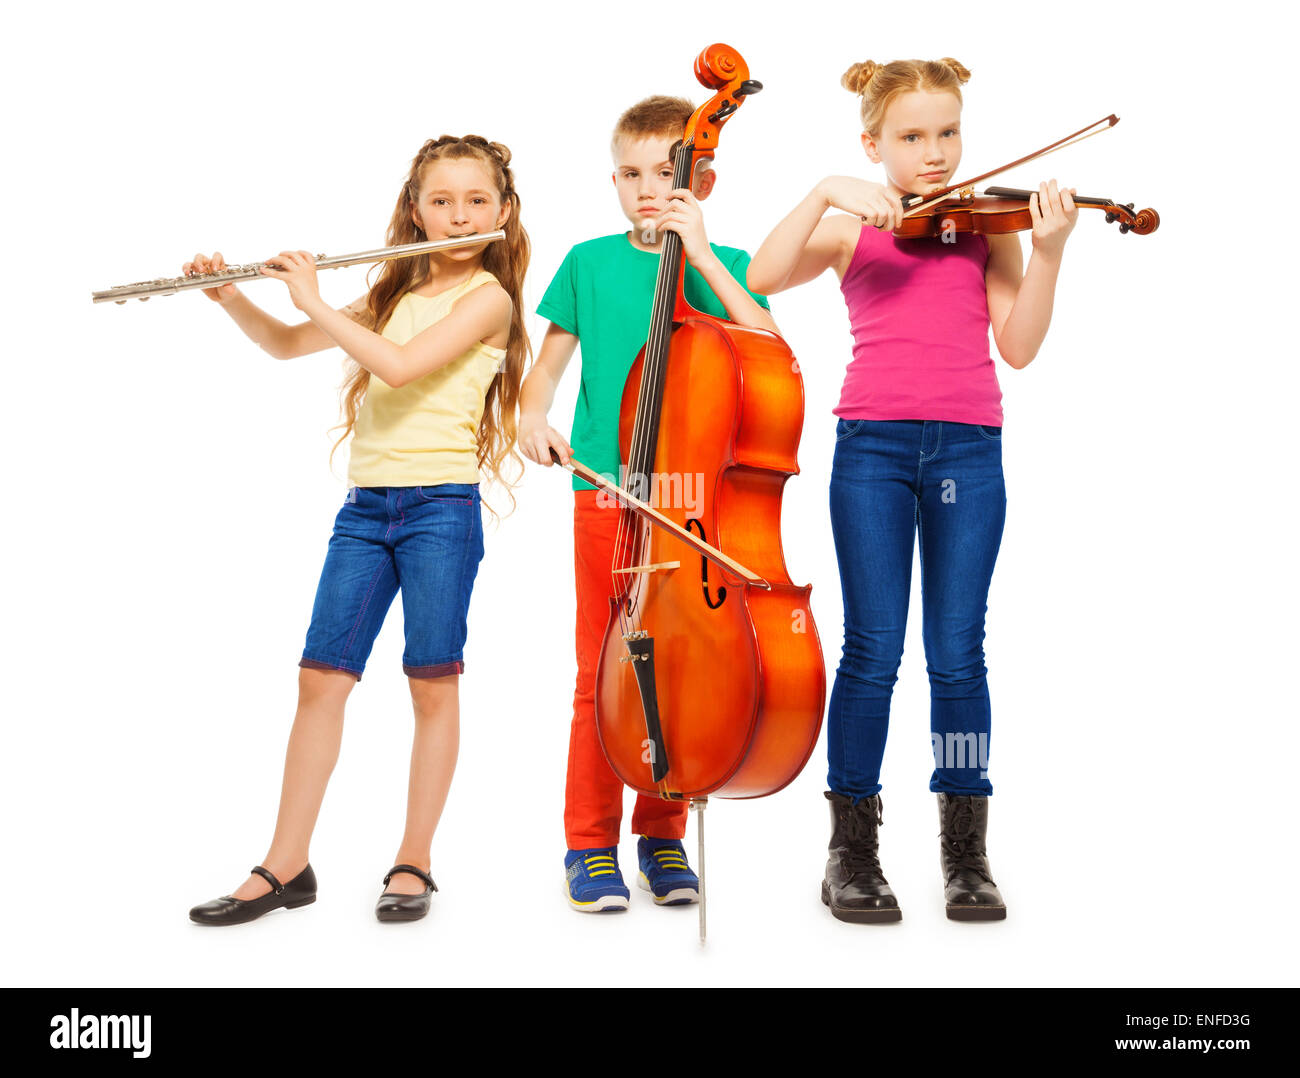 Children playing on musical instruments together Stock Photo